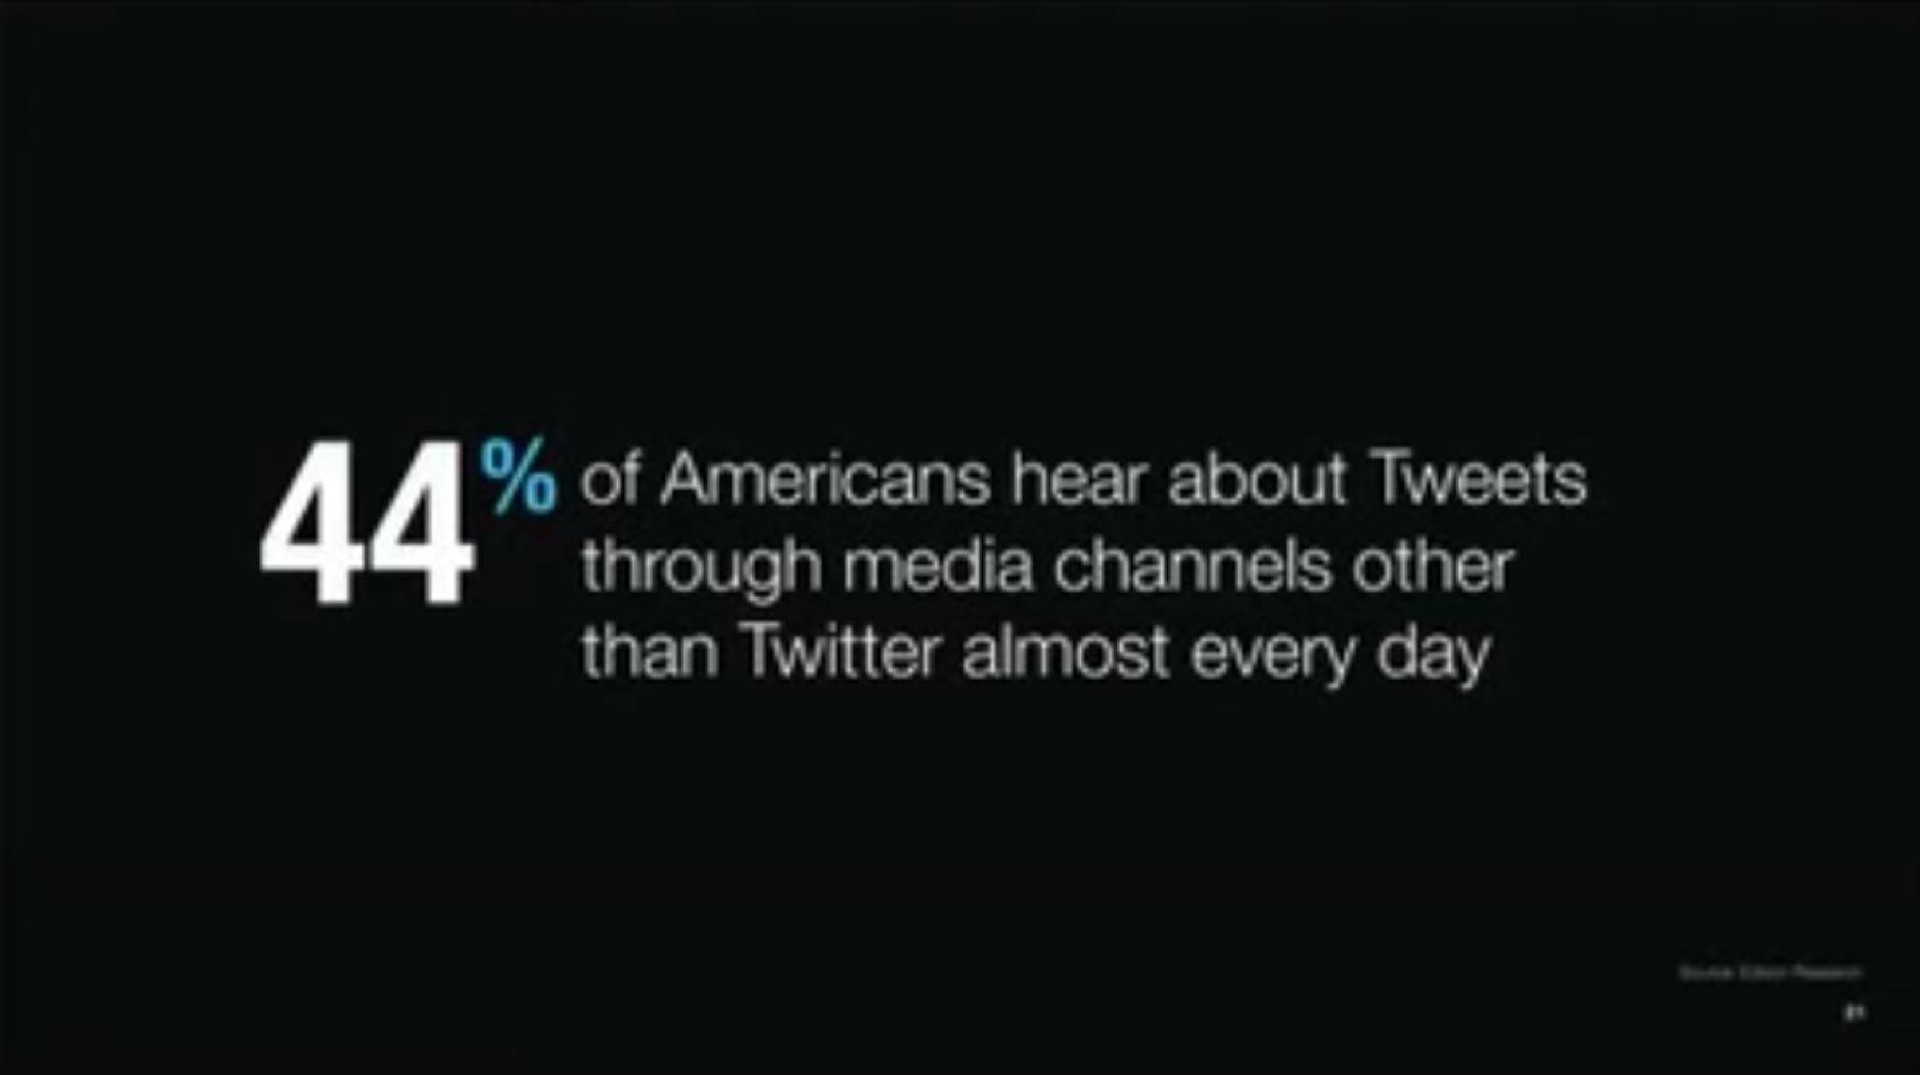 i of hear about tweets through media channels other than twitter almost every day | Twitter